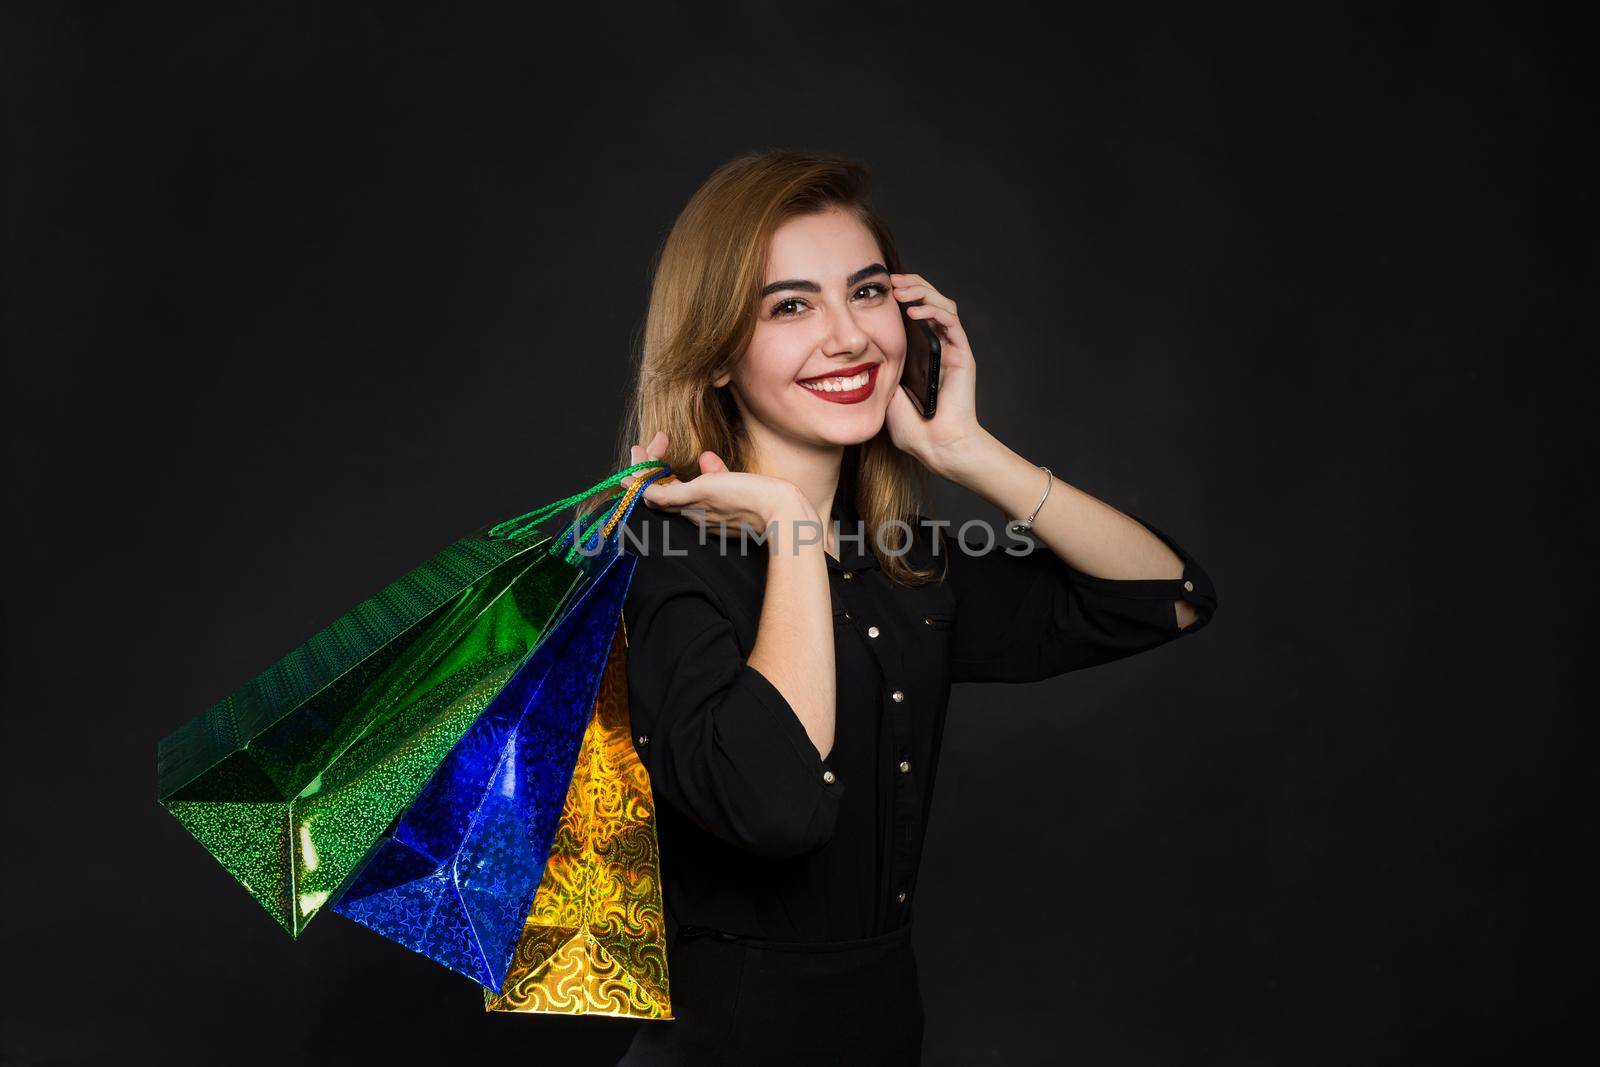 young woman with packages, shopping, discounts on a brown background